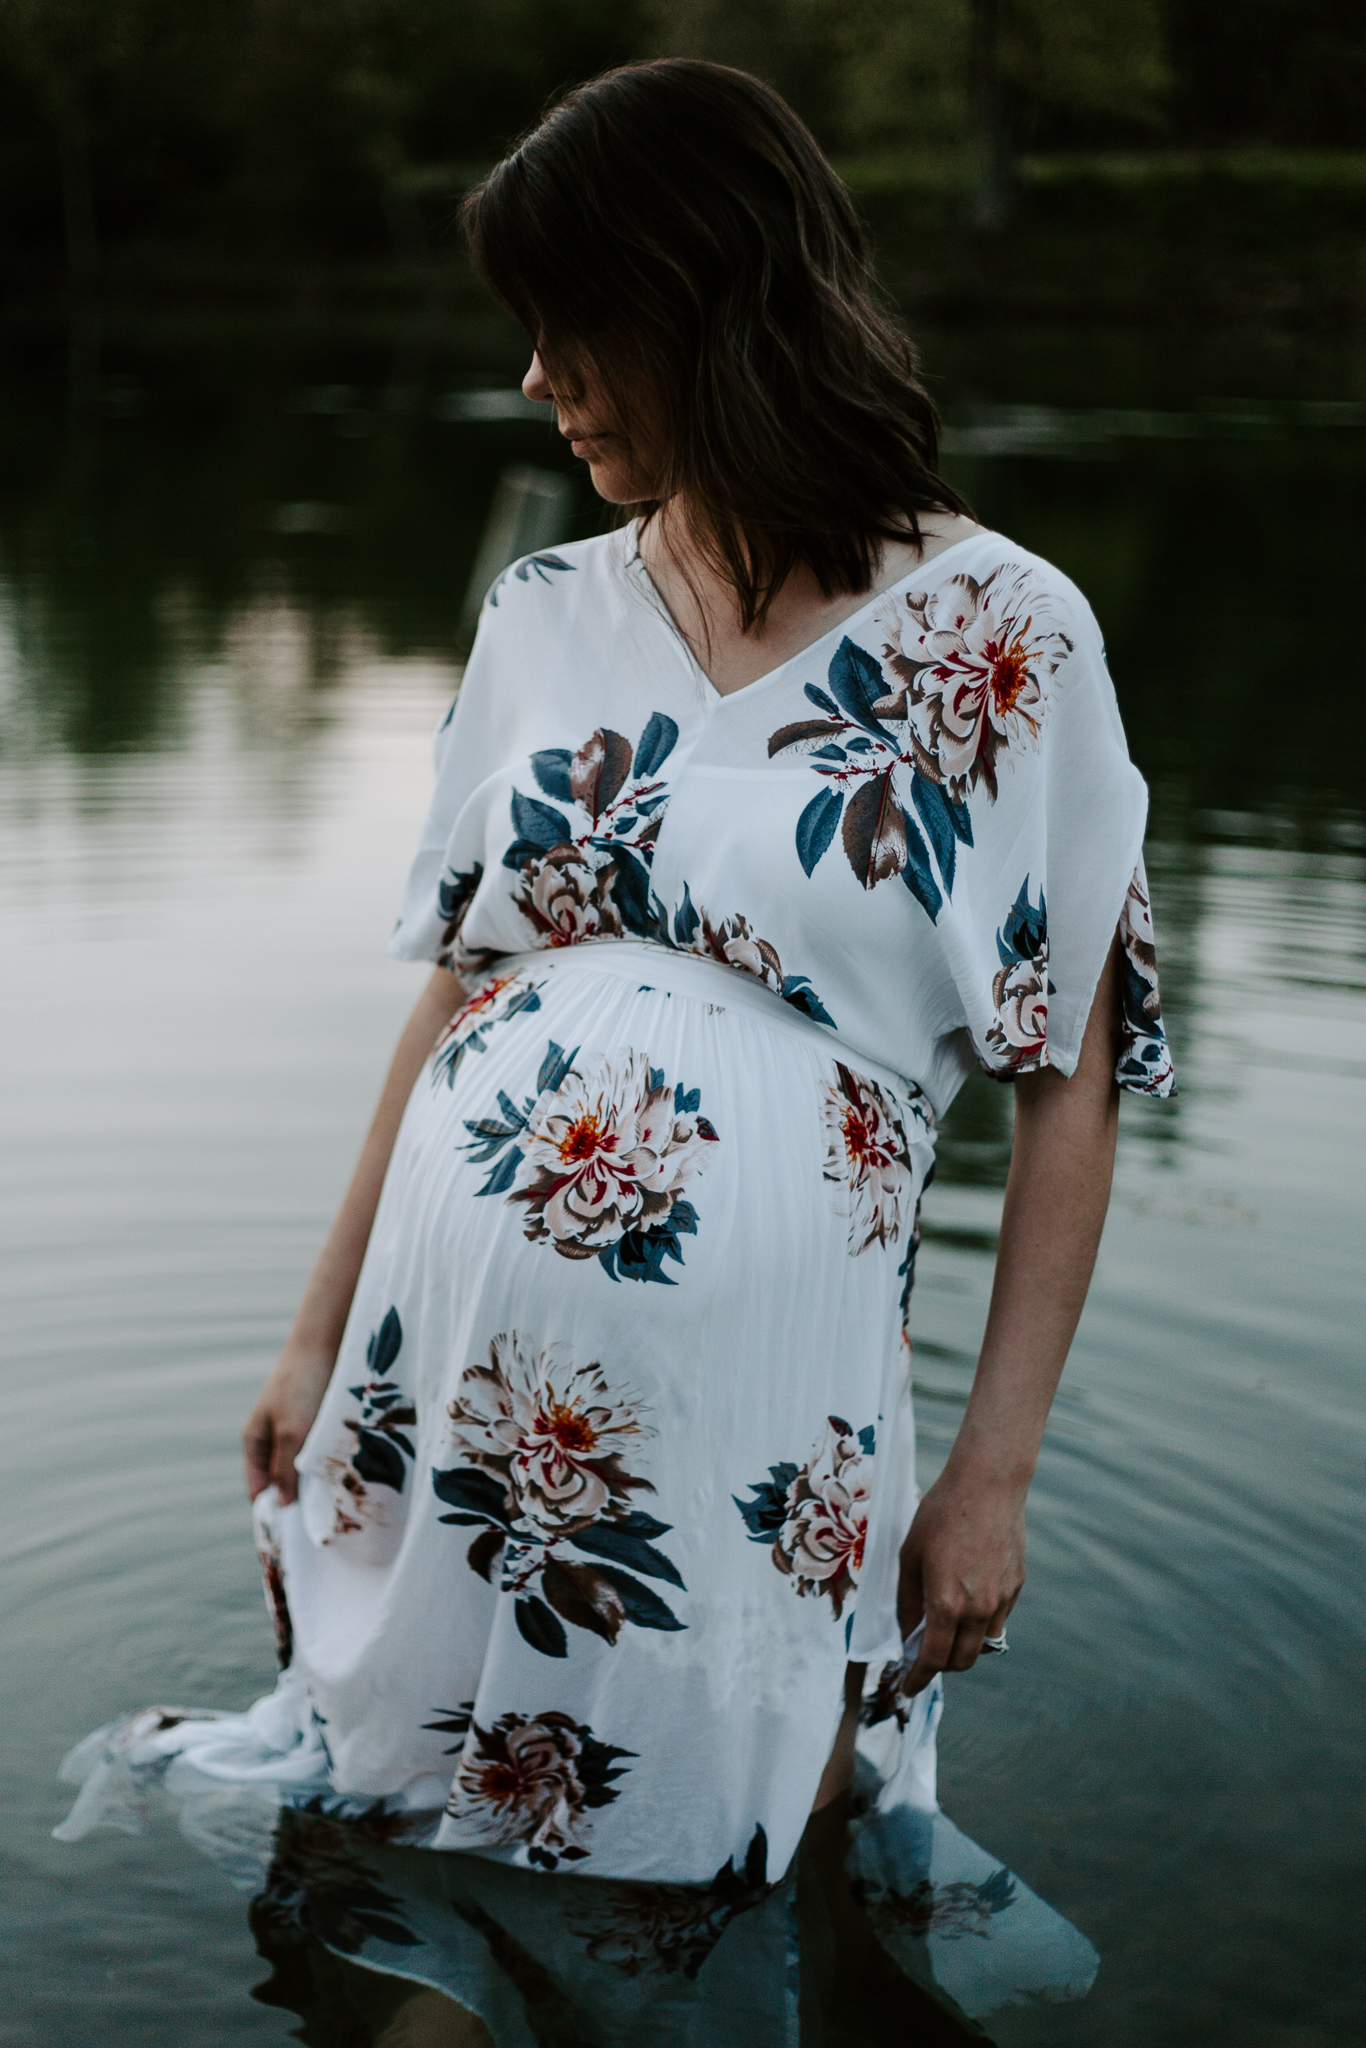 Expecing mother in a floral maxi dress wading in pond at blue hour.